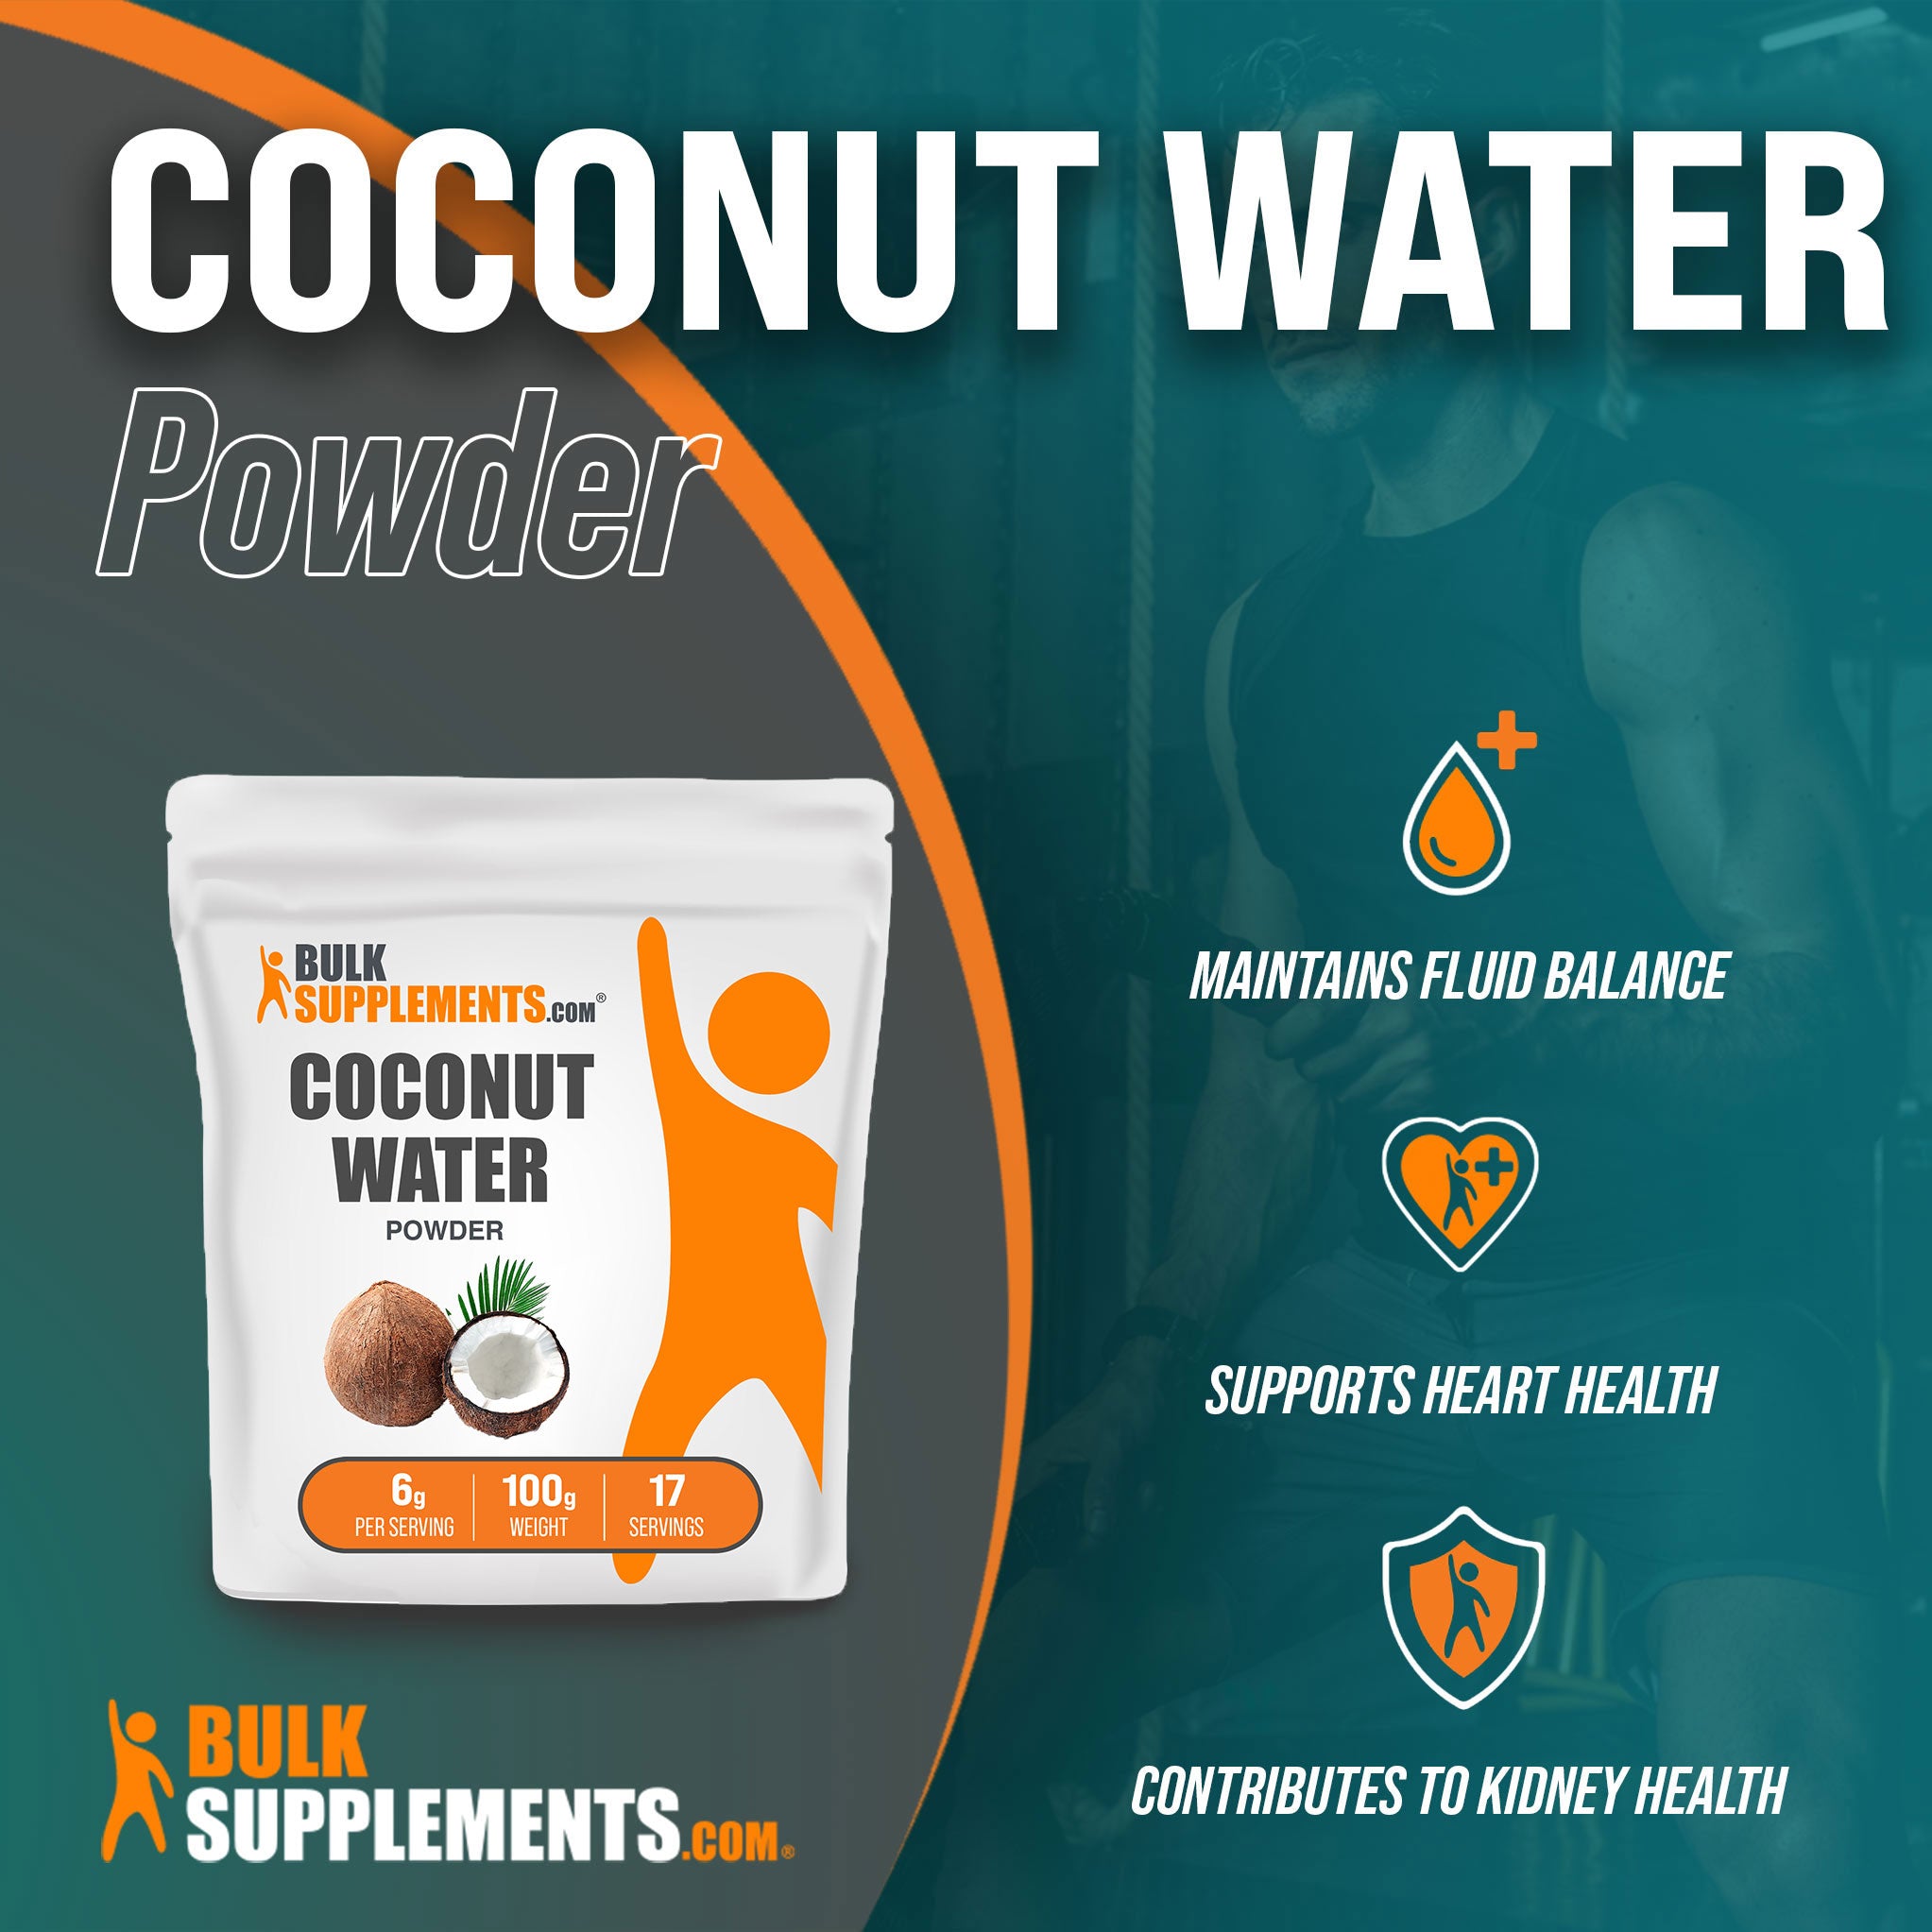 Benefits of our 100g Electrolytes Powder; maintains fluid balance, supports heart health, contributes to kidney health